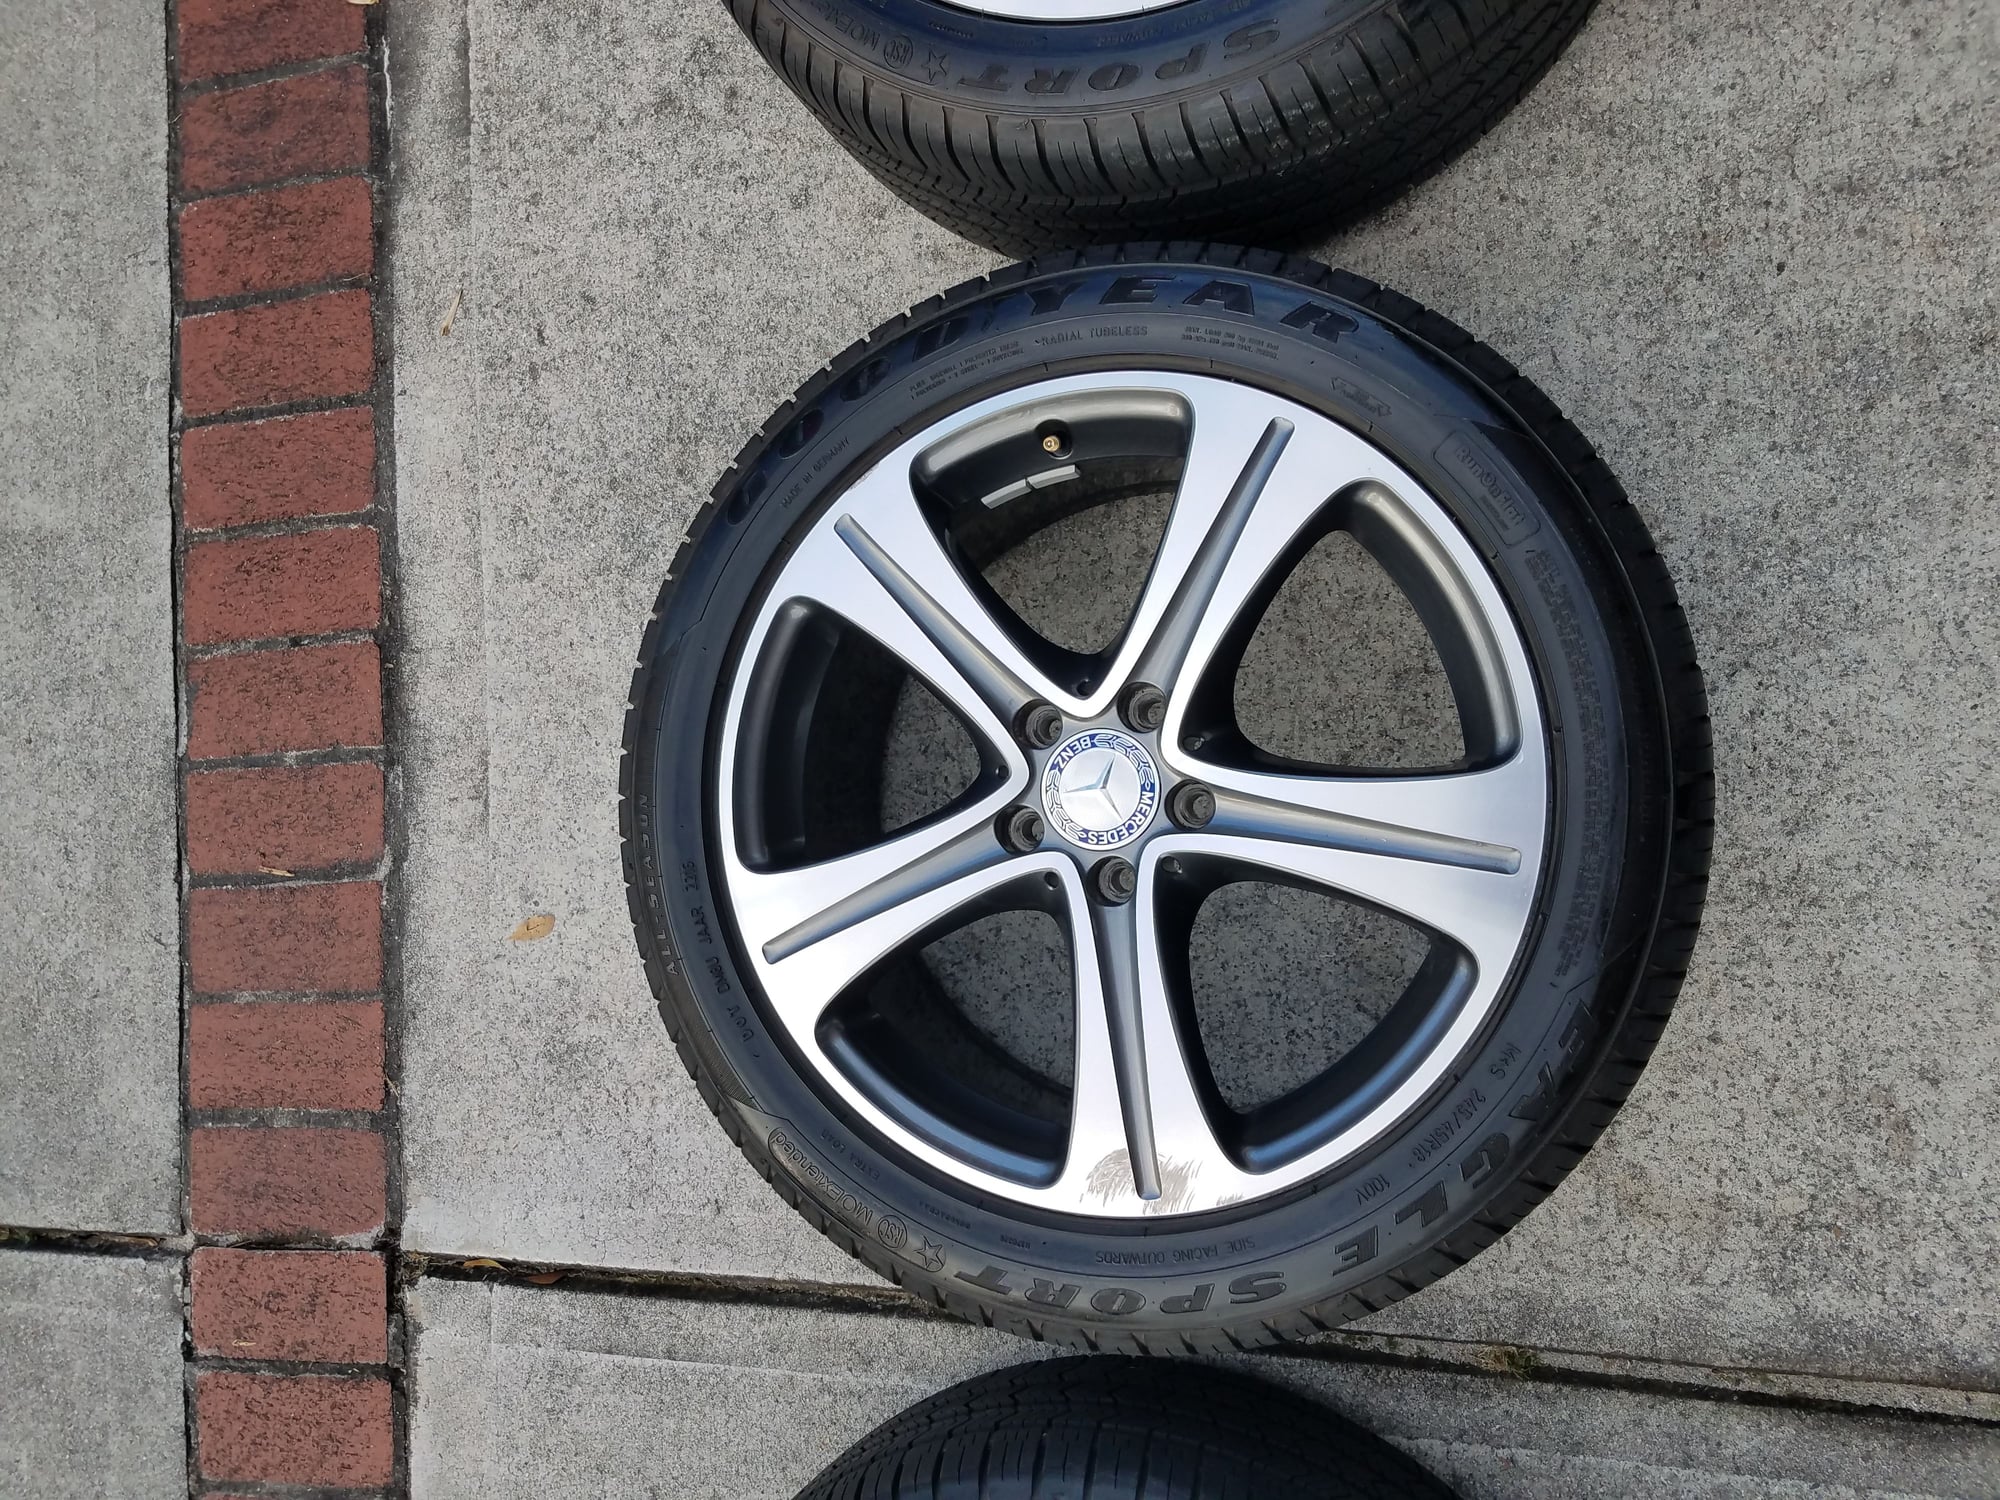 Wheels and Tires/Axles - Mercedes 8Jx18" Inch Original W213 E300 E-Class OEM Wheels/Tires A2134011400 Goodyear - Used - 2017 to 2018 Mercedes-Benz E300 - Decatur, GA 30033, United States